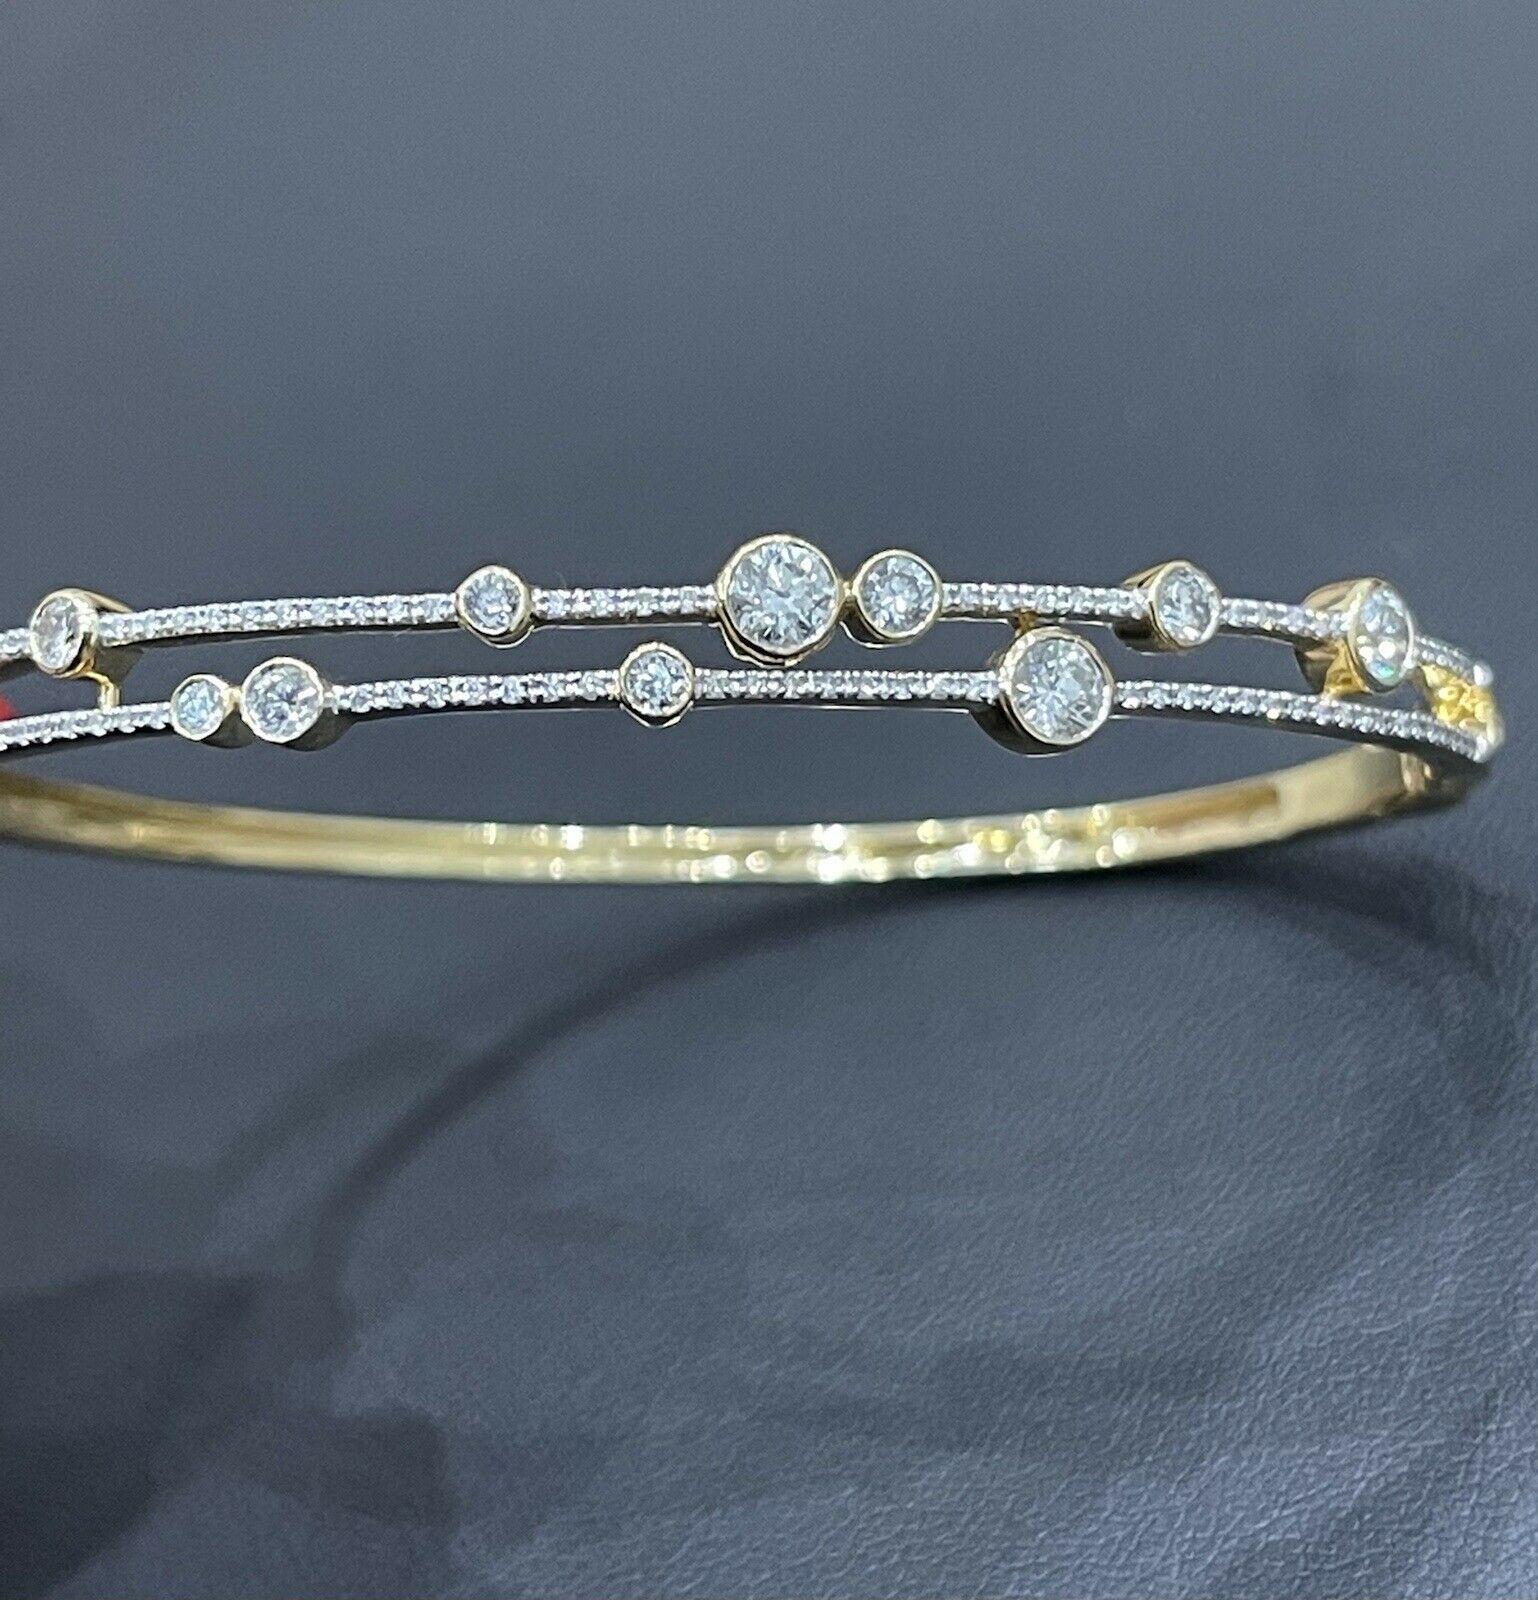 Fine high jewellery meets classic

Straight from heart of London Hatton Garden

Gorgeous bangle set in over 15g solid 18ct Gold with solitaire diamonds totalling 1ct

Hallmarked 750

Approx weight 16g

It will fit a wrist 6.5inch

SI1/VS